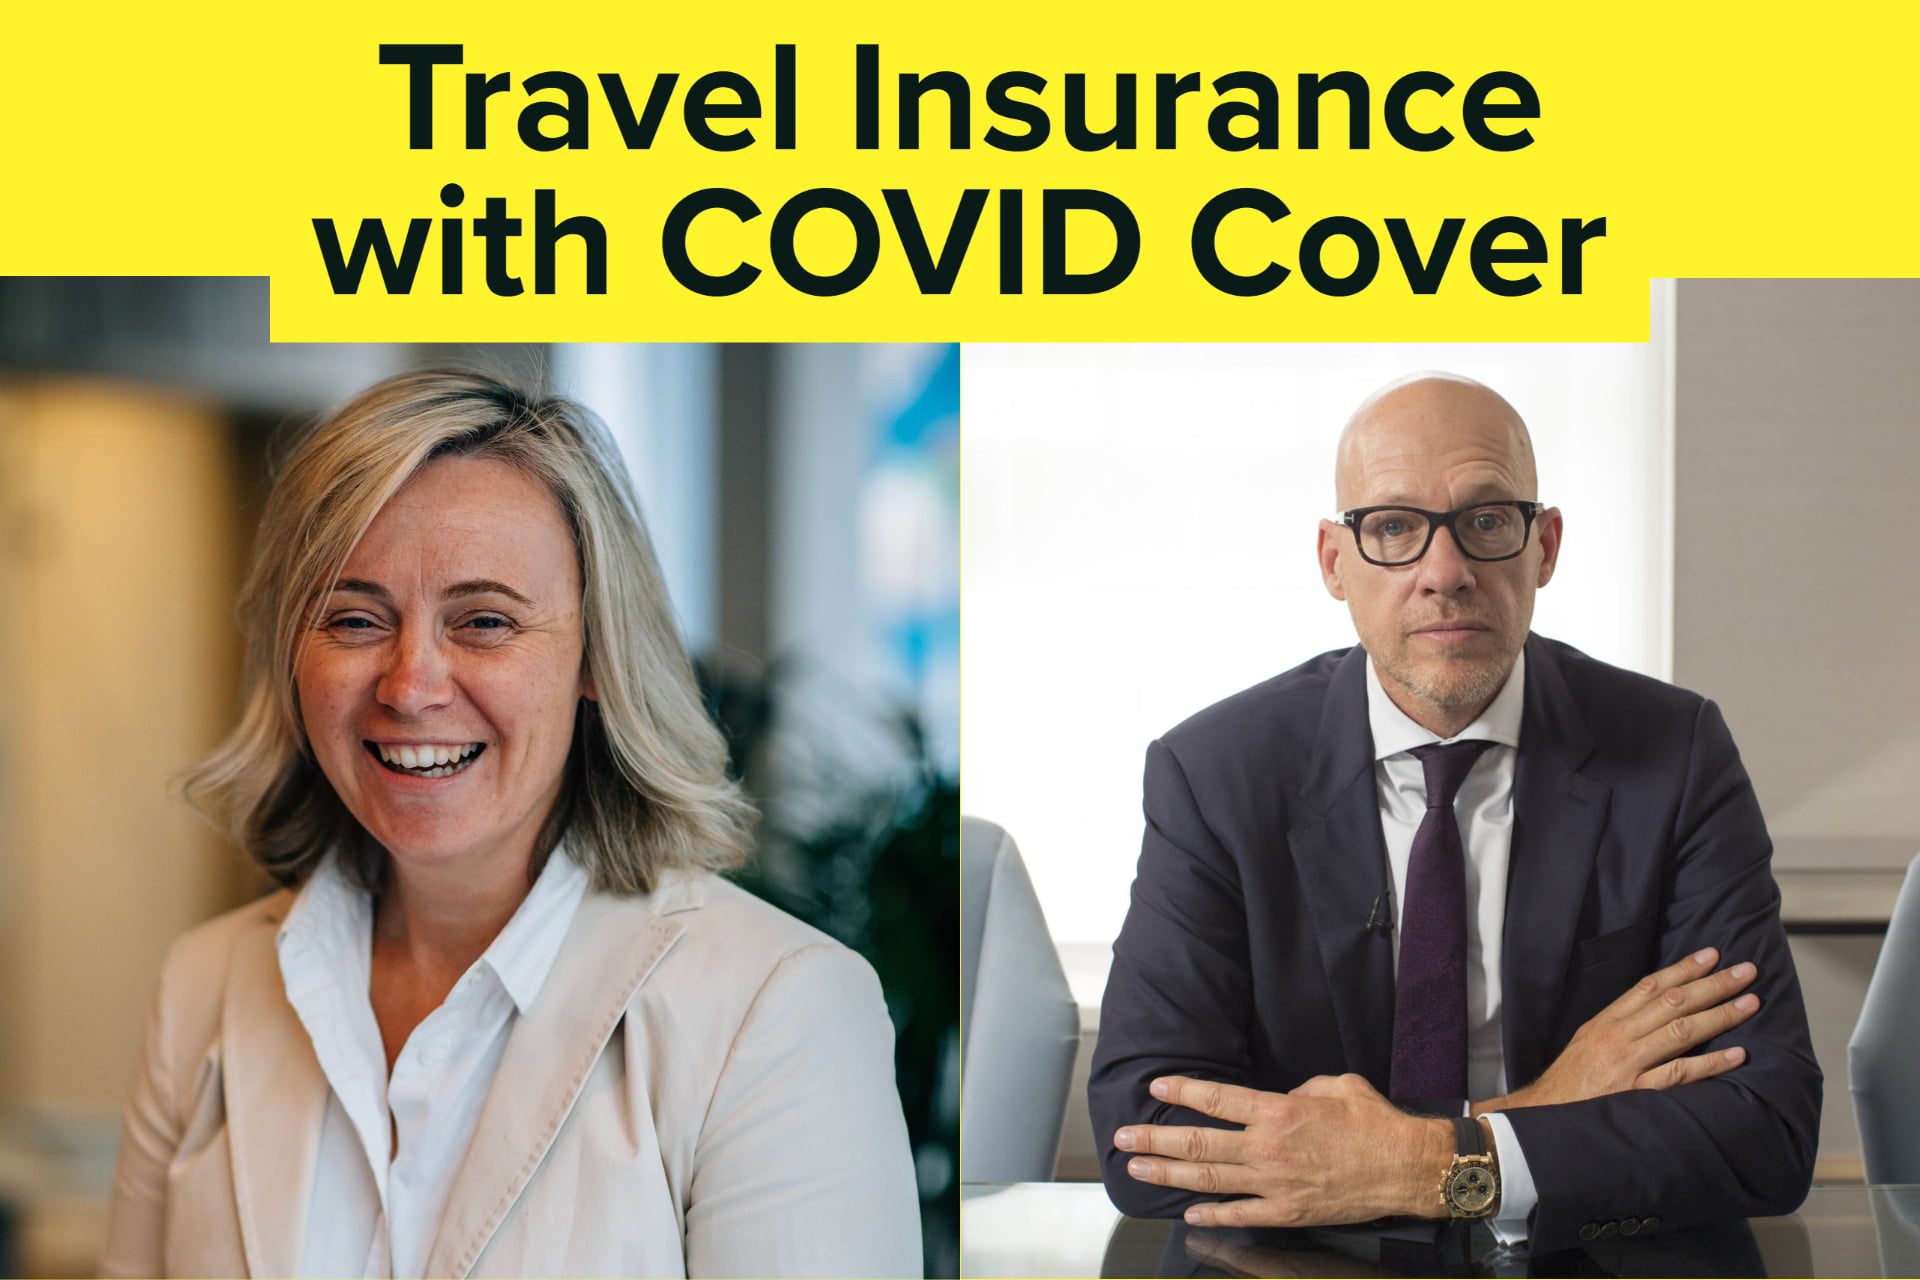 Travel Insurance with COVID Cover - Ryan Howsam (Staysure) Interview